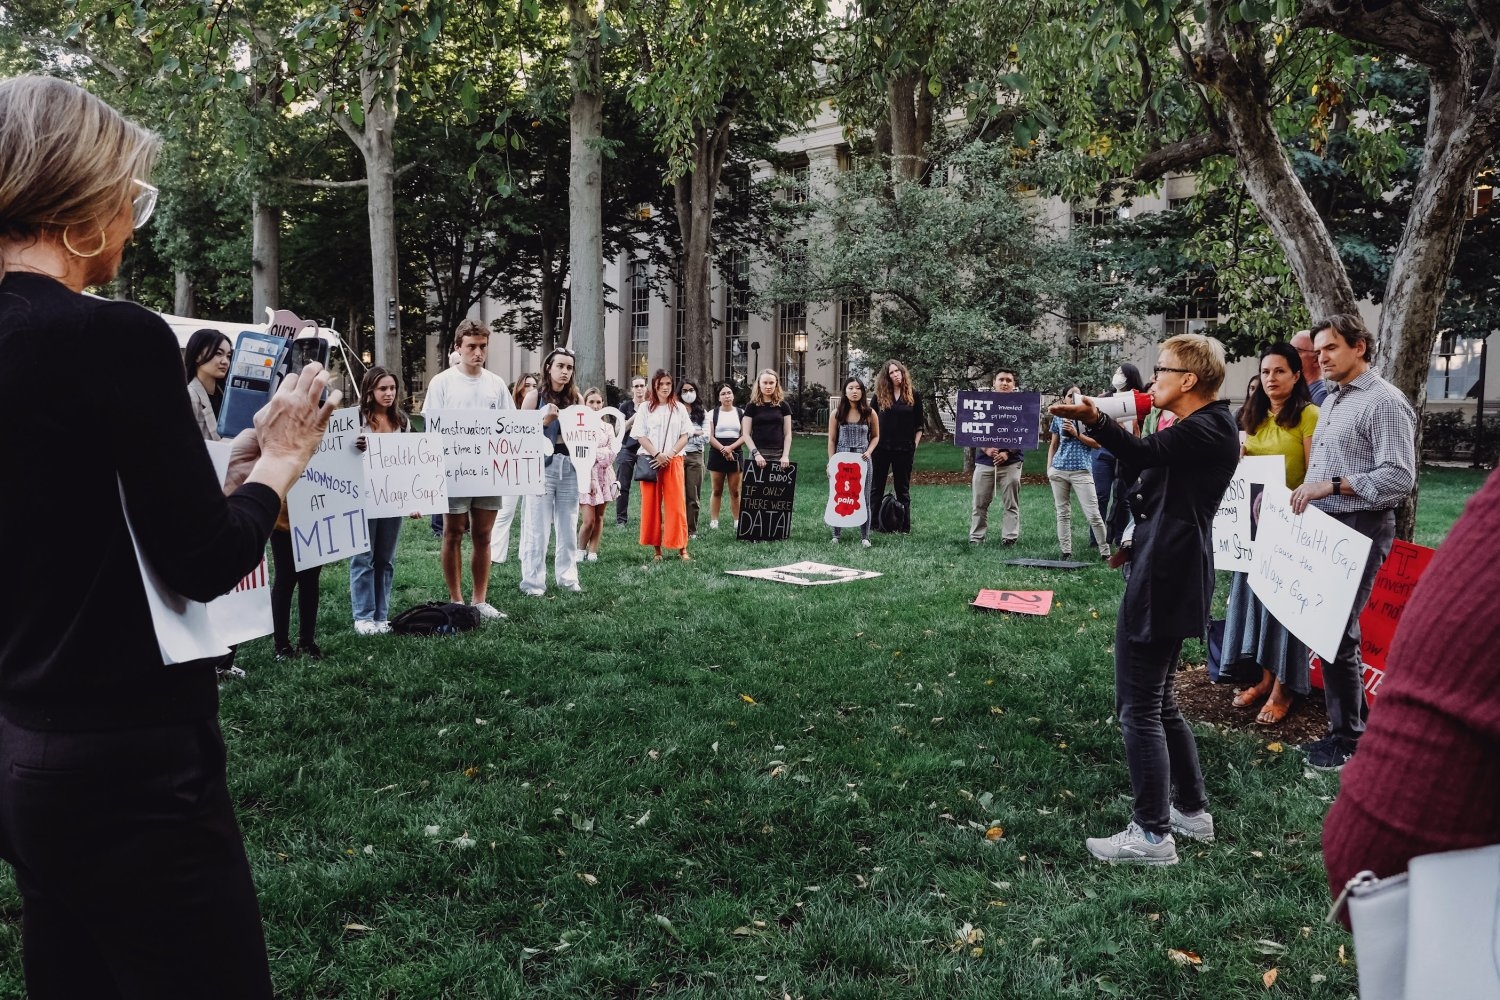 Professor Linda Griffith addresses rally attendees at the Stand Up and Be Counted event on Killian Court.